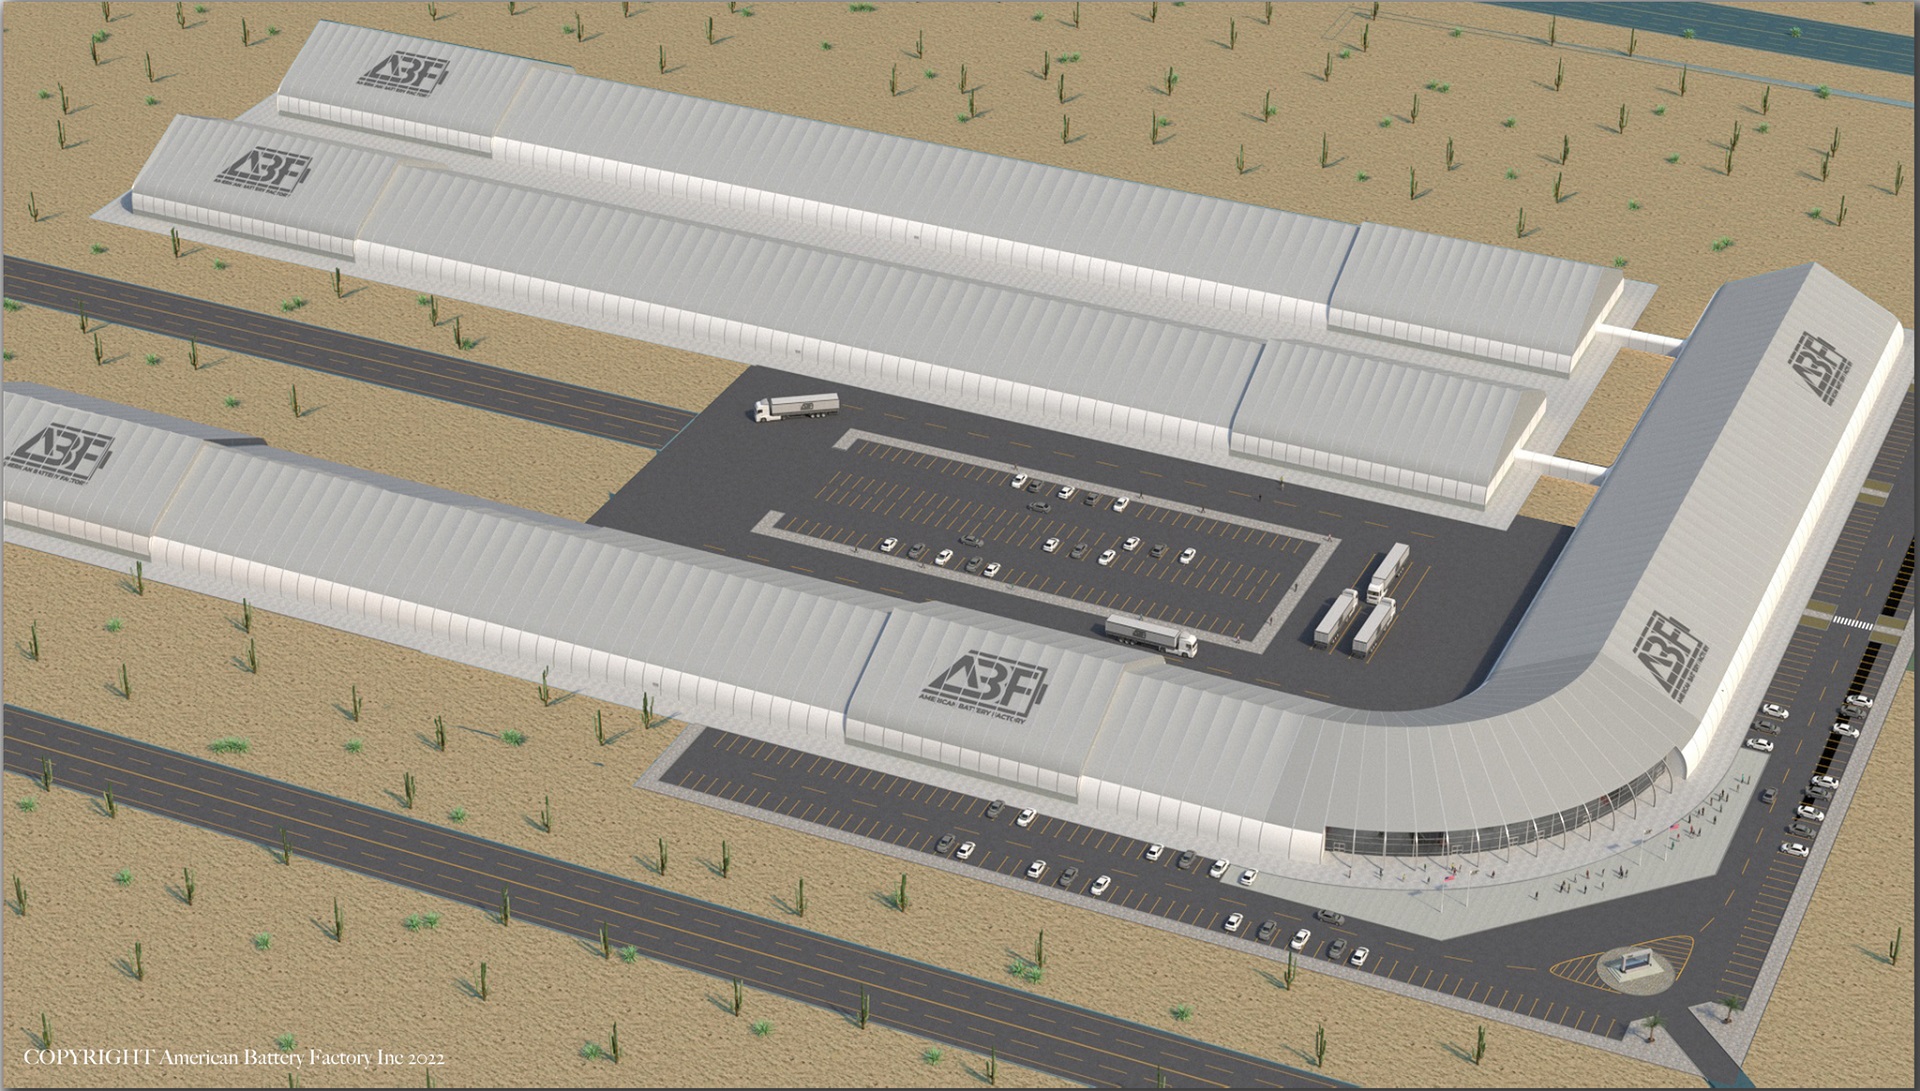 A rendering of the proposed American Battery Factory plant south of Tucson.  